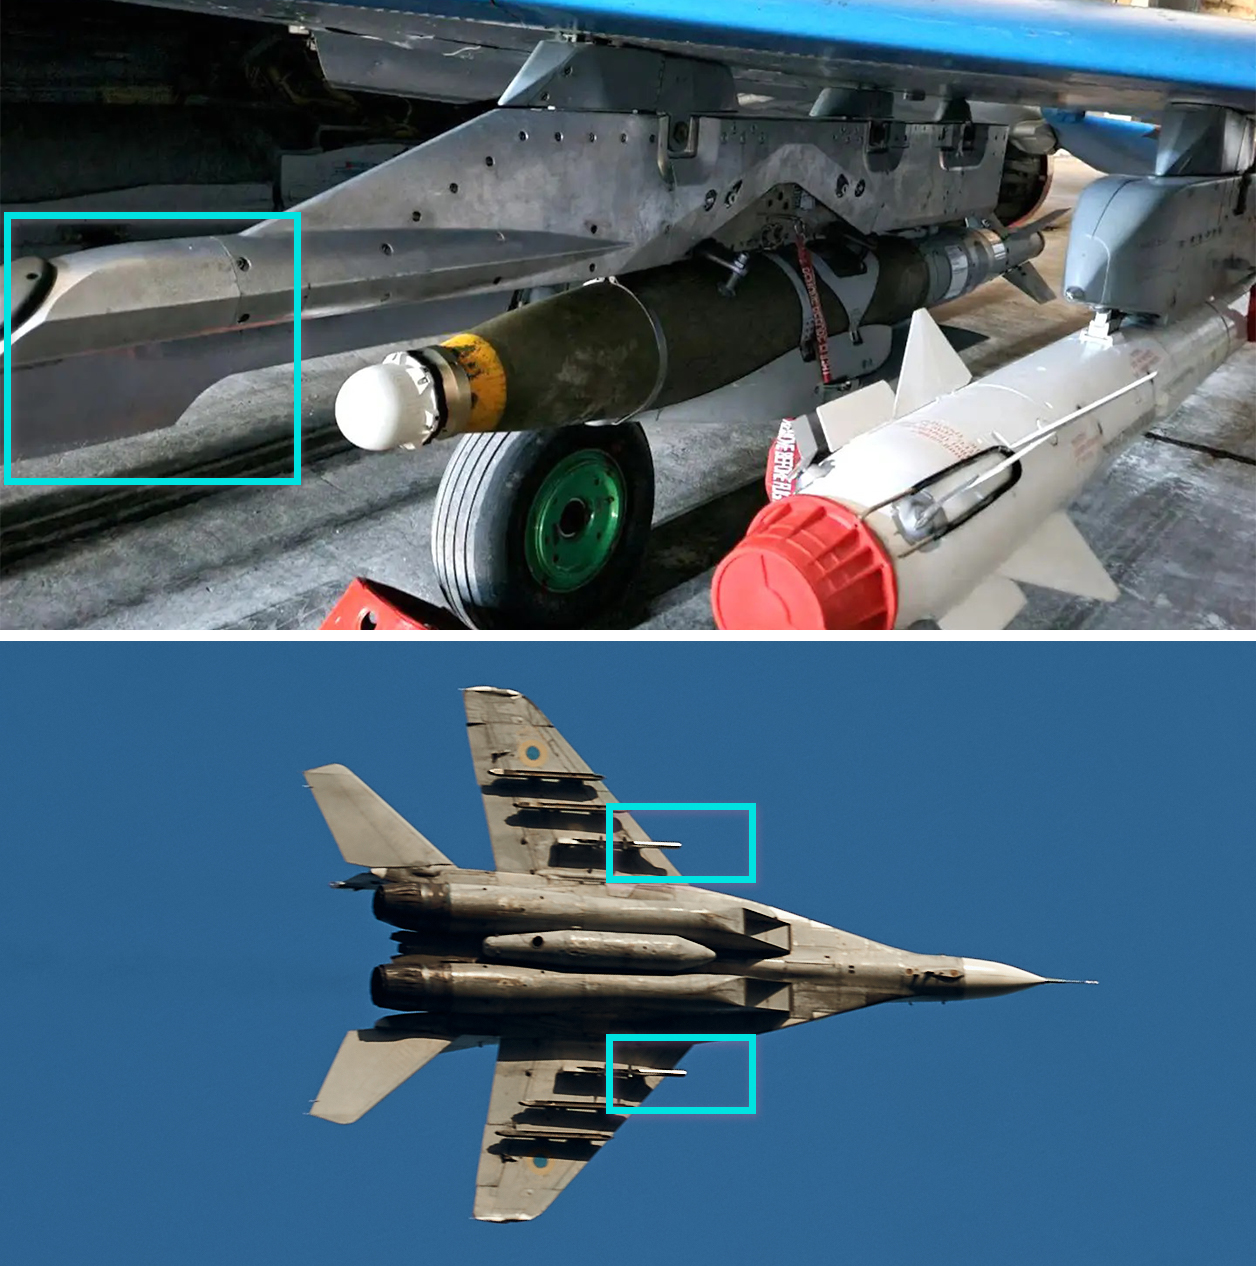 Close-up photo showcases the uncharacteristic protrusions earlier spotted on particular Ukrainian MiG-29s